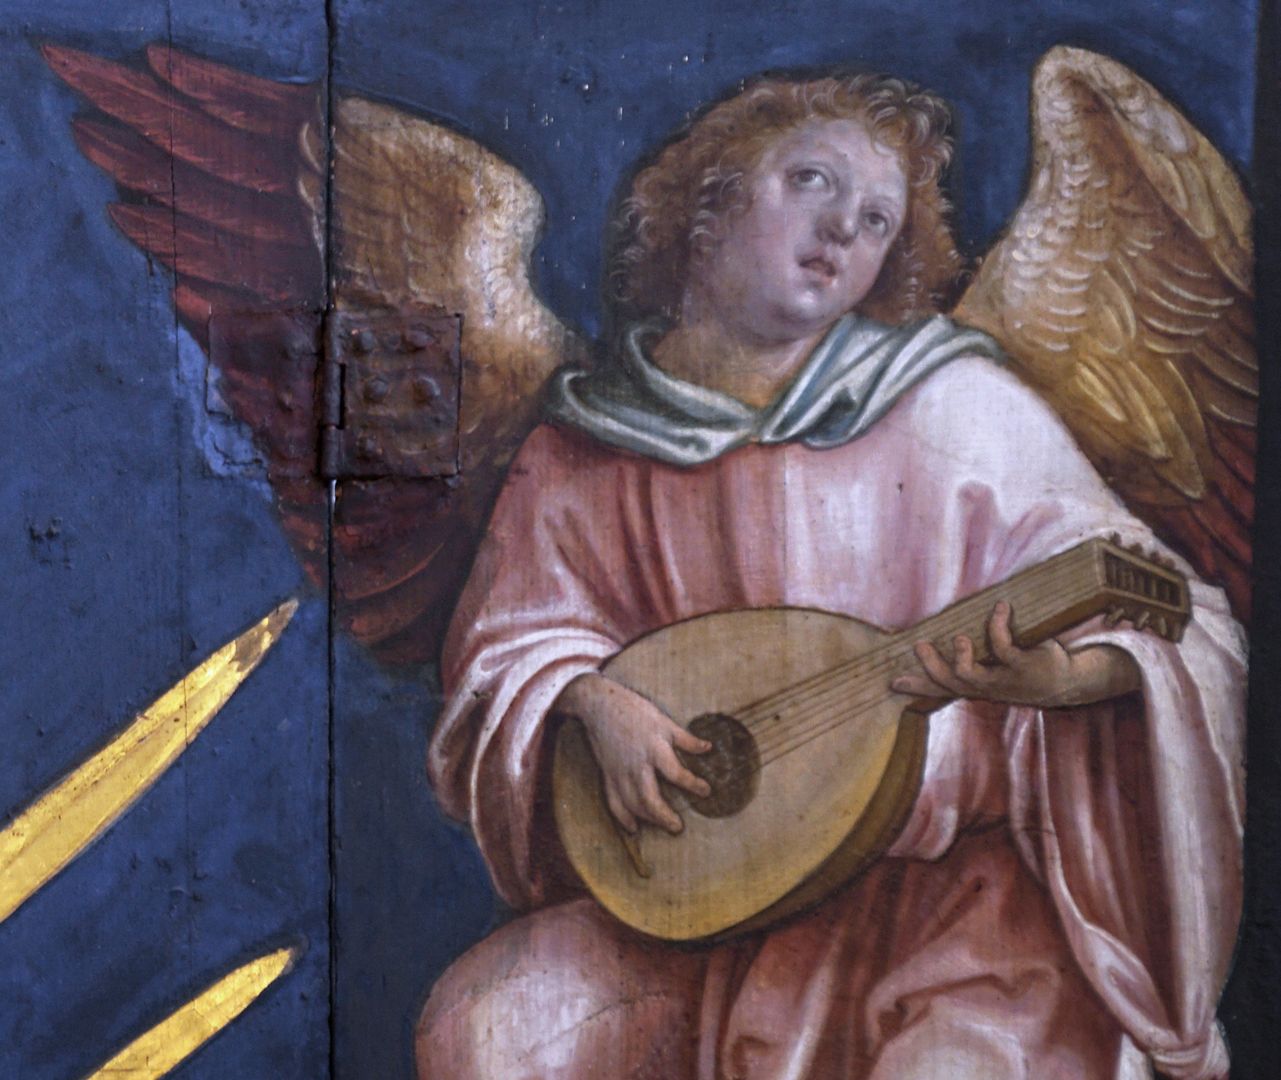 Altar of the Beautiful Mary Angel with the lute (very Italian style), detail